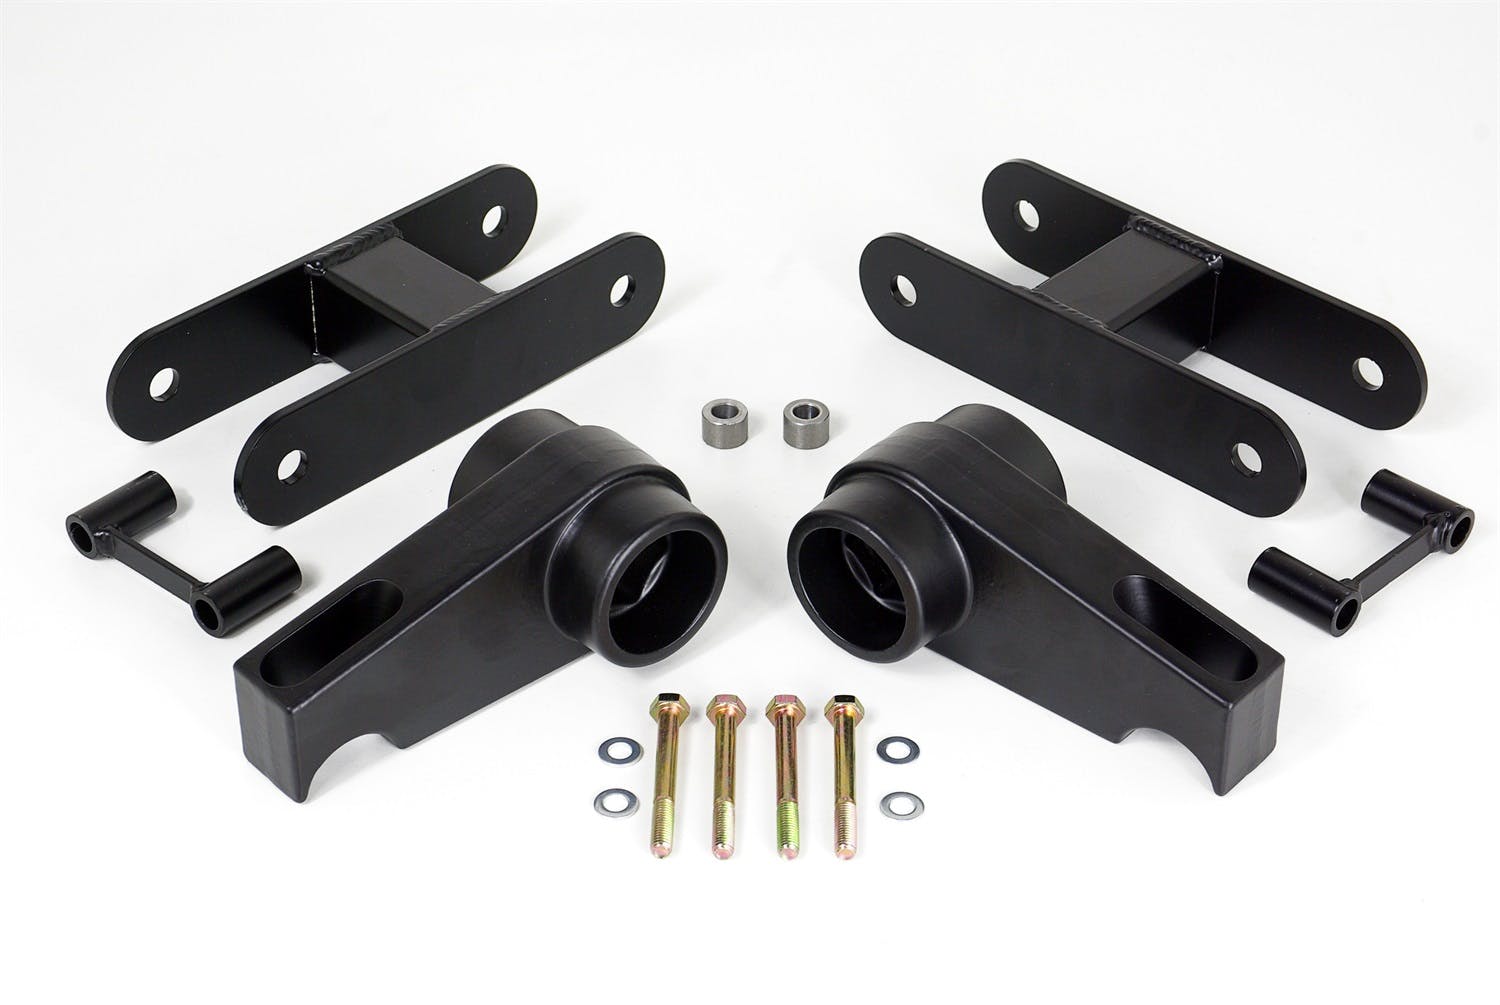 ReadyLIFT 69-3070 2.25" Front with 1.5" Rear SST Lift Kit